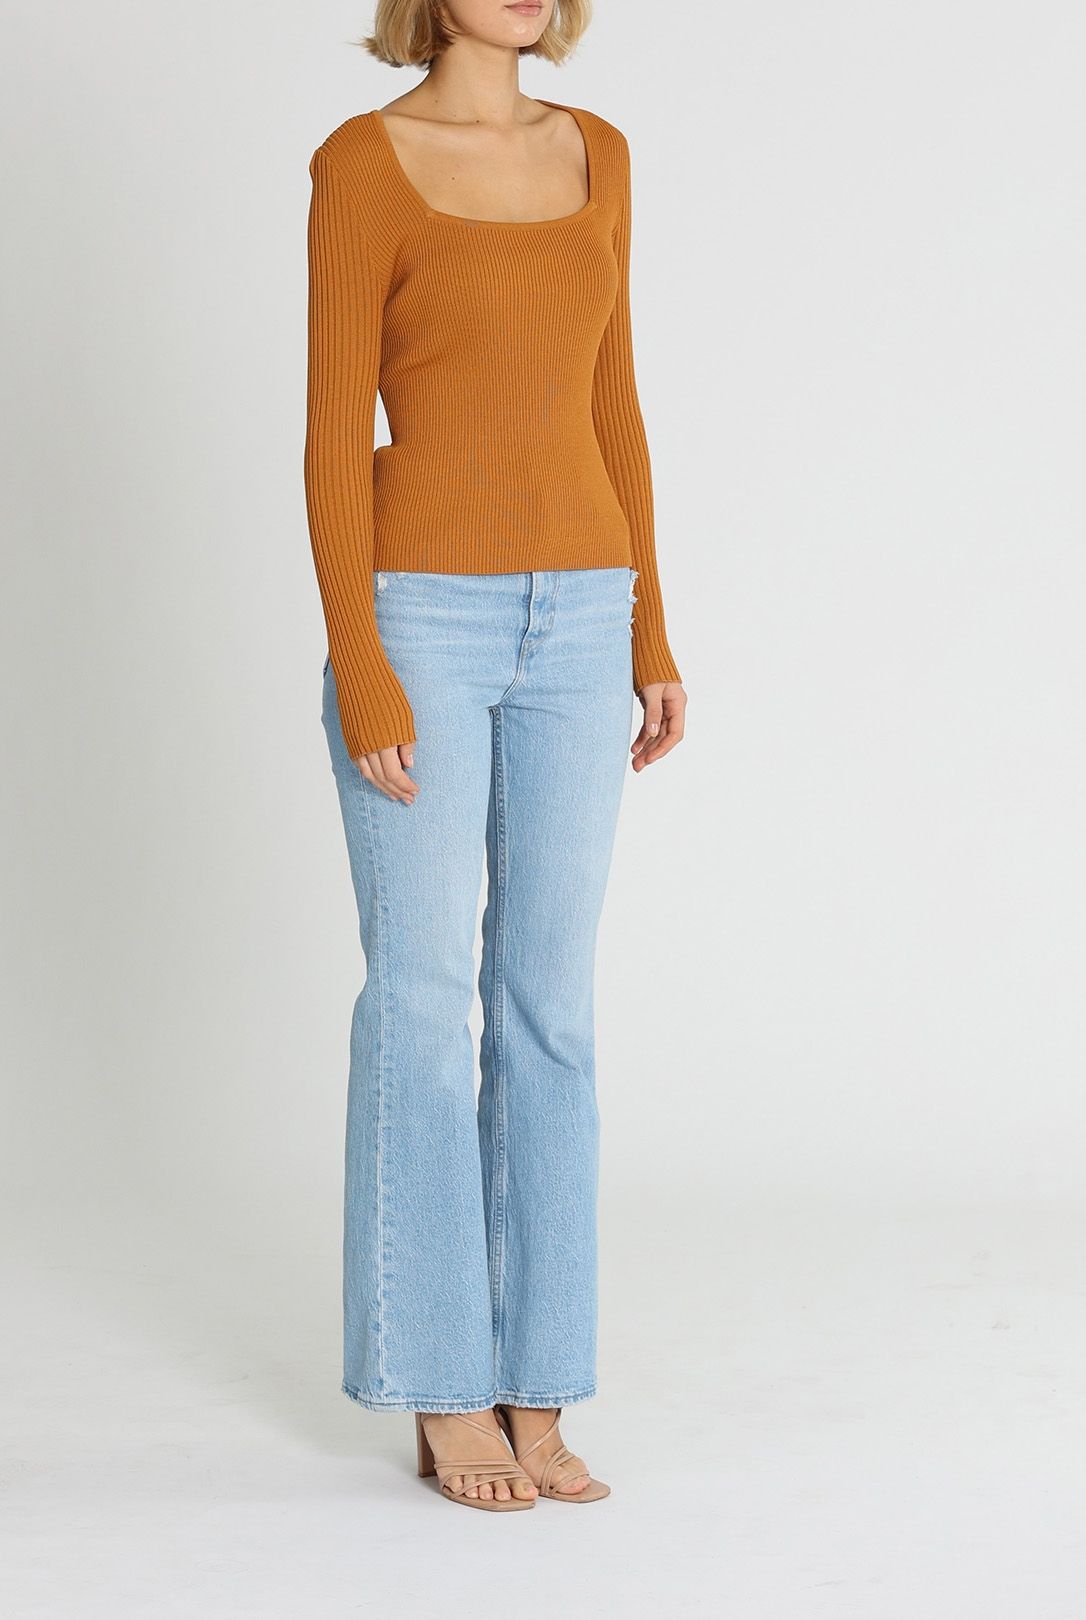 Alice McCall Michelle Top Tan Long Sleeves